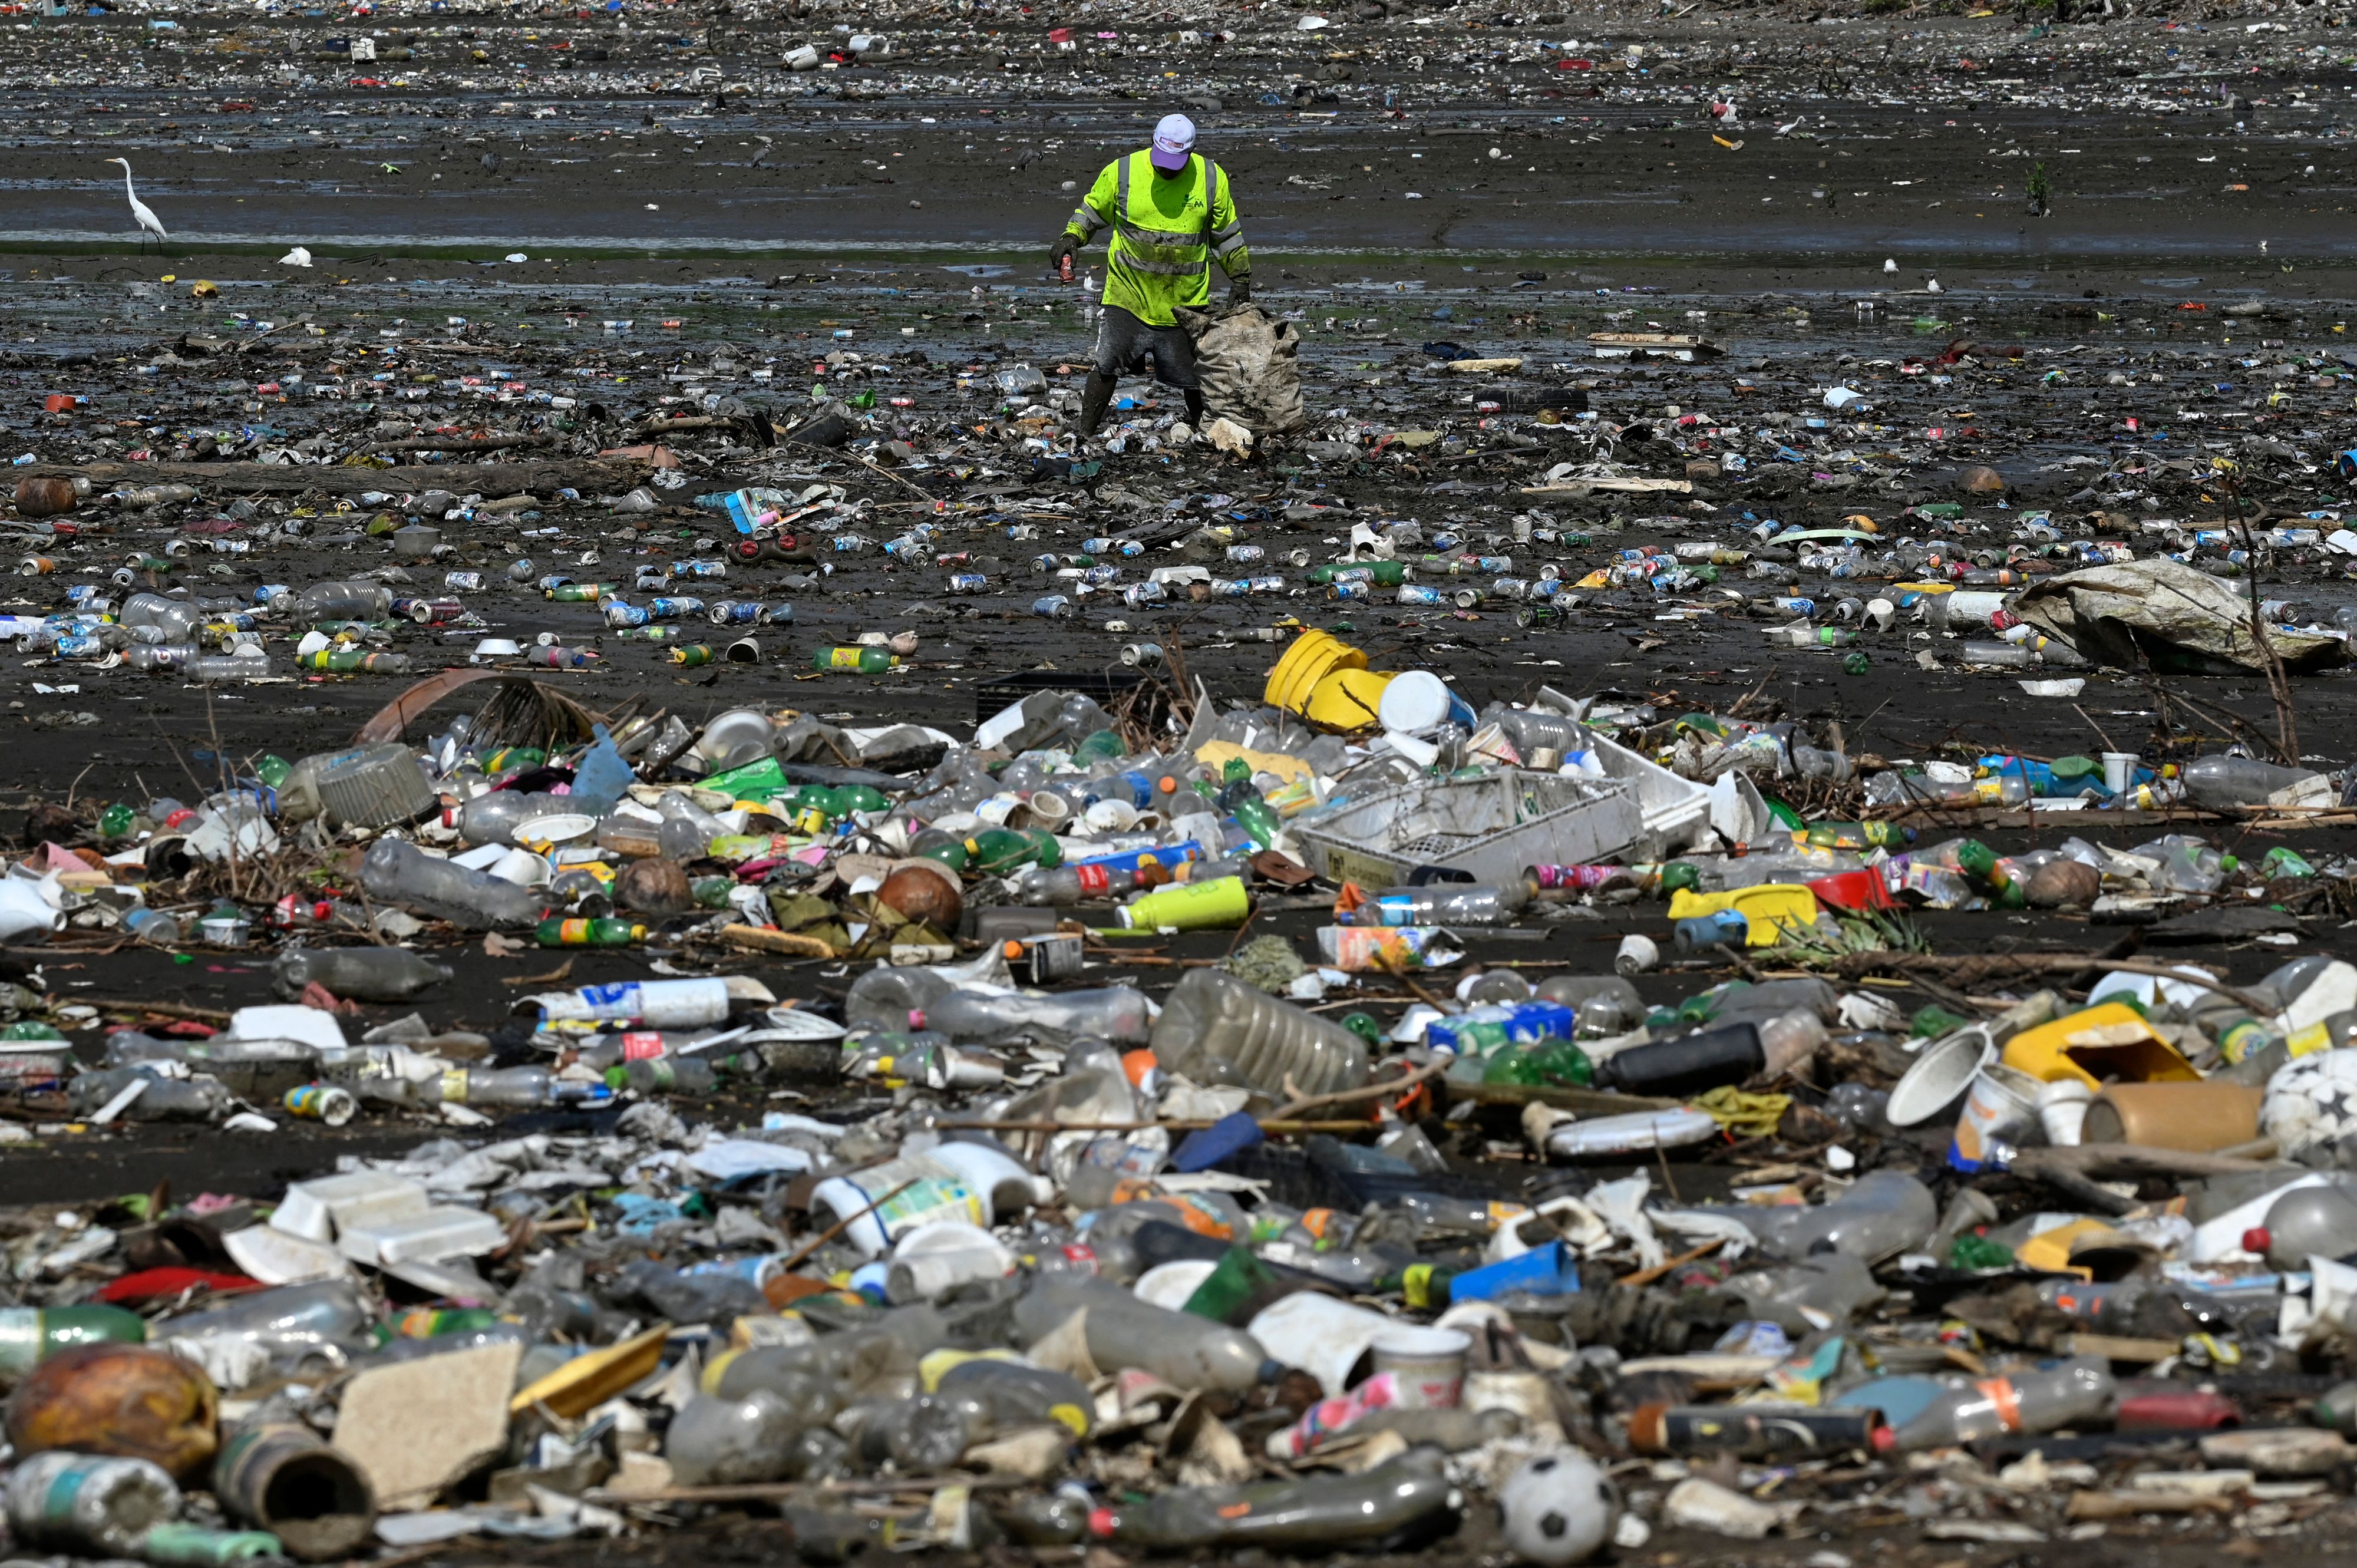 A man collects garbage, including plastic waste, at the beach of Costa del Este, in Panama City, on 19 April